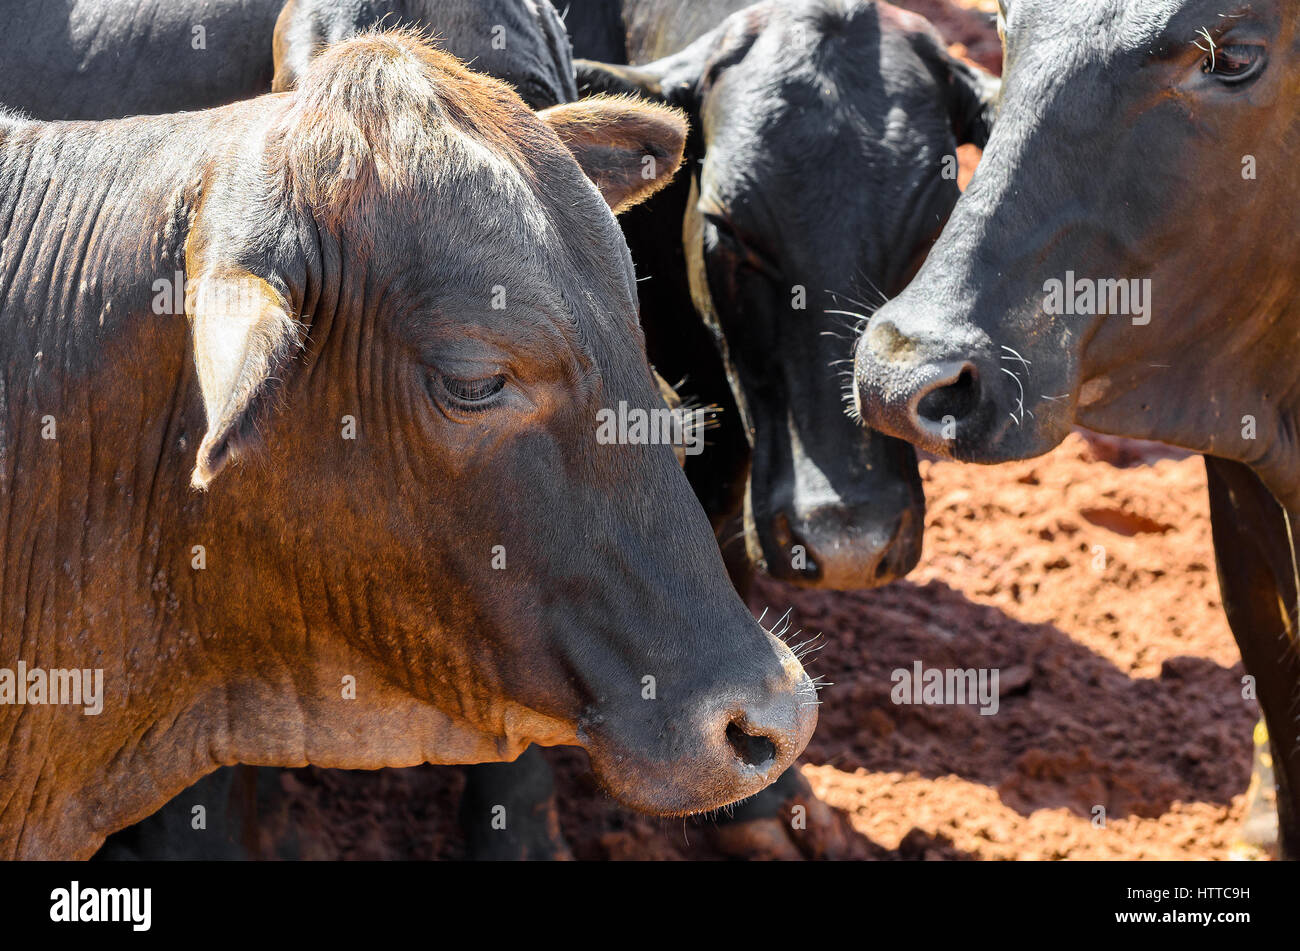 Herd of black oxen together on a corral of a farm. Four oxen. Stock Photo